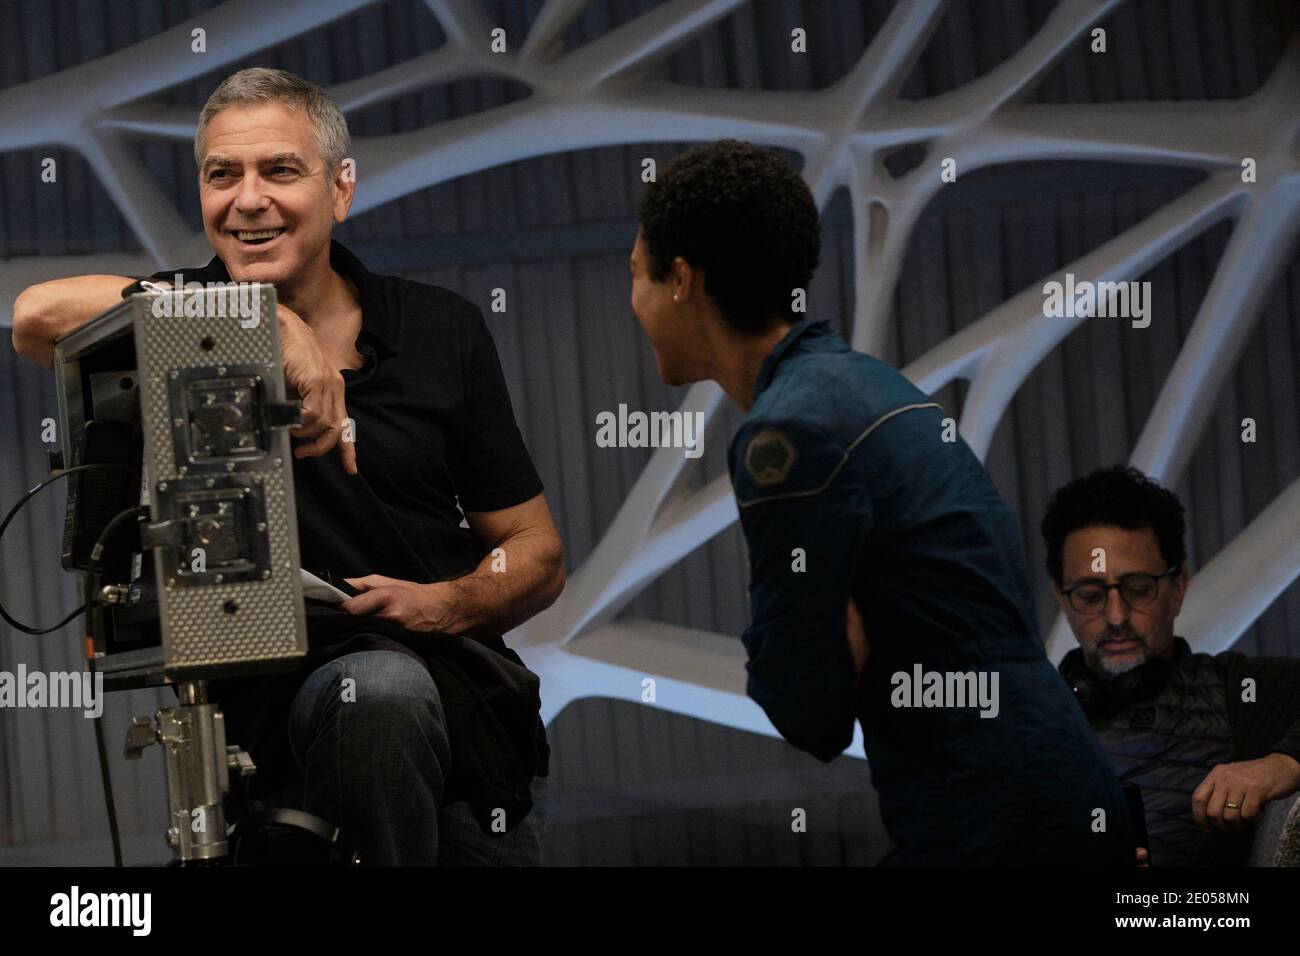 RELEASE DATE: TITLE: December 23, 2020 The Midnight Sky STUDIO: Netflix DIRECTOR: George Clooney PLOT: This post-apocalyptic tale follows Augustine, a lonely scientist in the Arctic, as he races to stop Sully and her fellow astronauts from returning home to a mysterious global catastrophe. STARRING: Director GEORGE CLOONEY on set. (Credit Image: © Netflix/Entertainment Pictures) Stock Photo